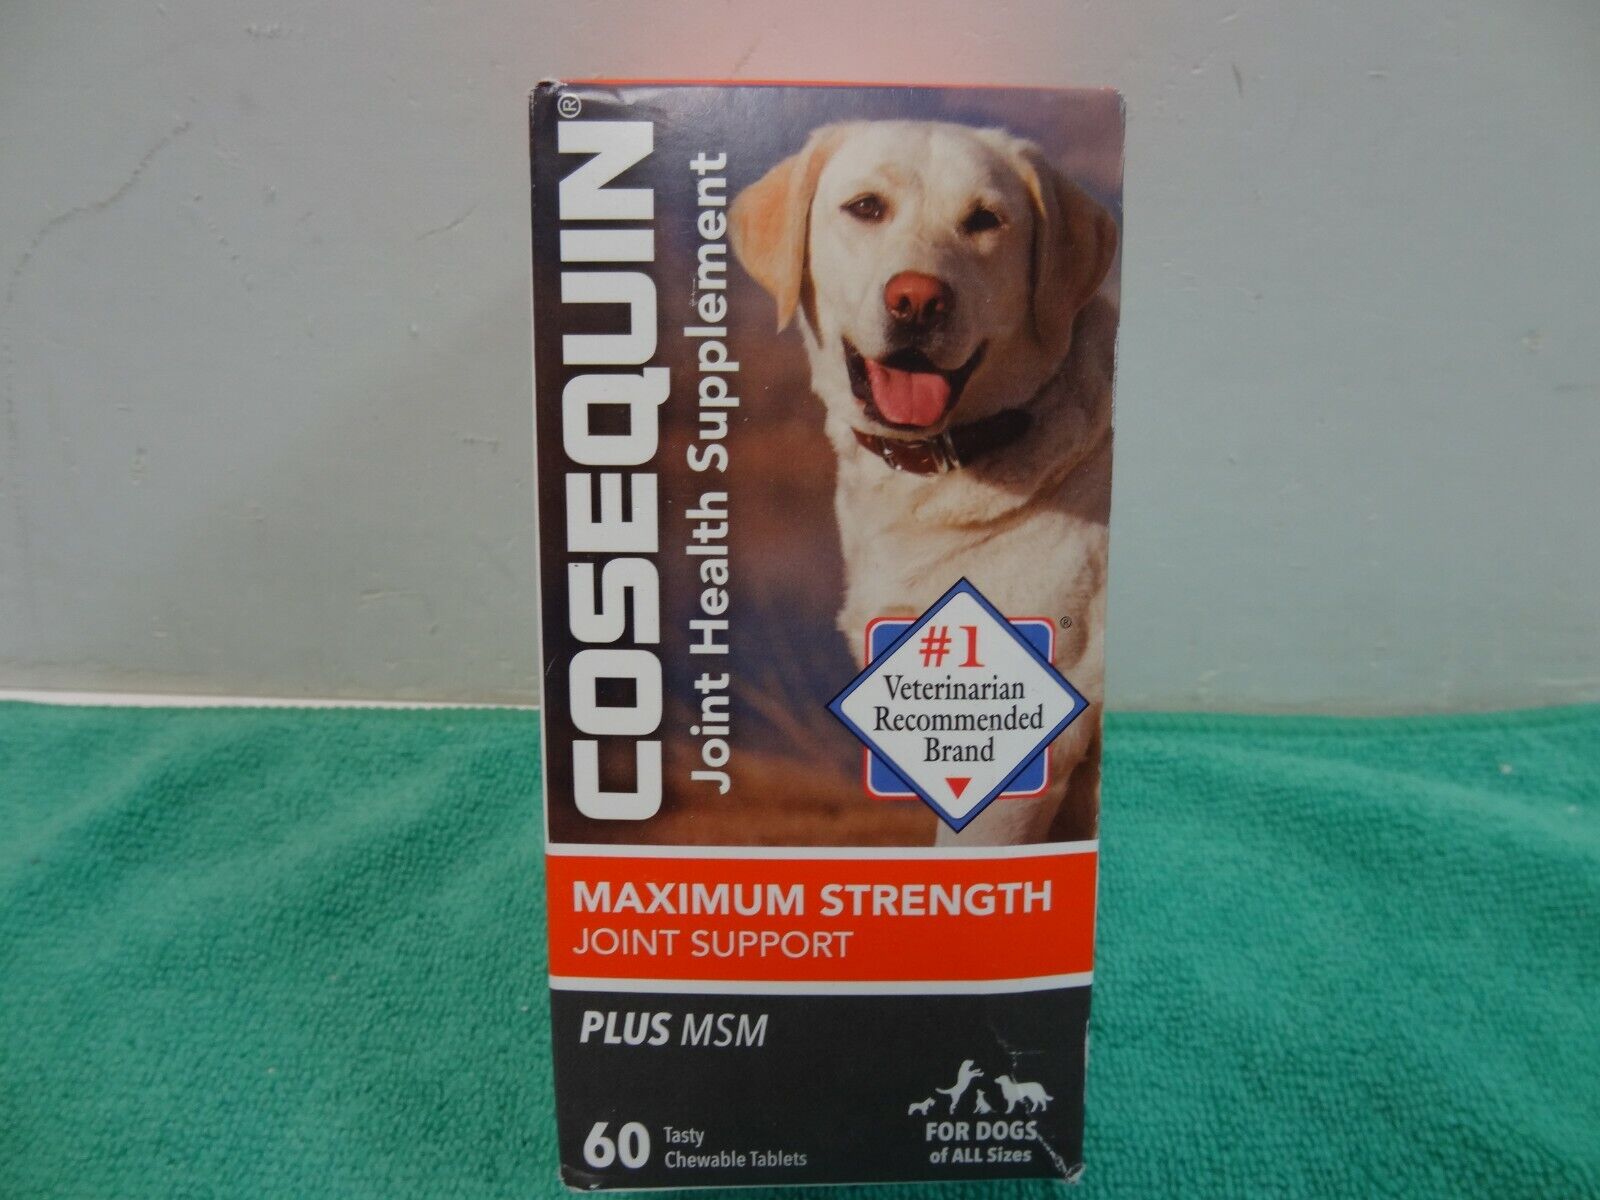 NEW Cosequin Max Strength Joint Support Plus MSM, 60 Chewable Tabs For All Dogs